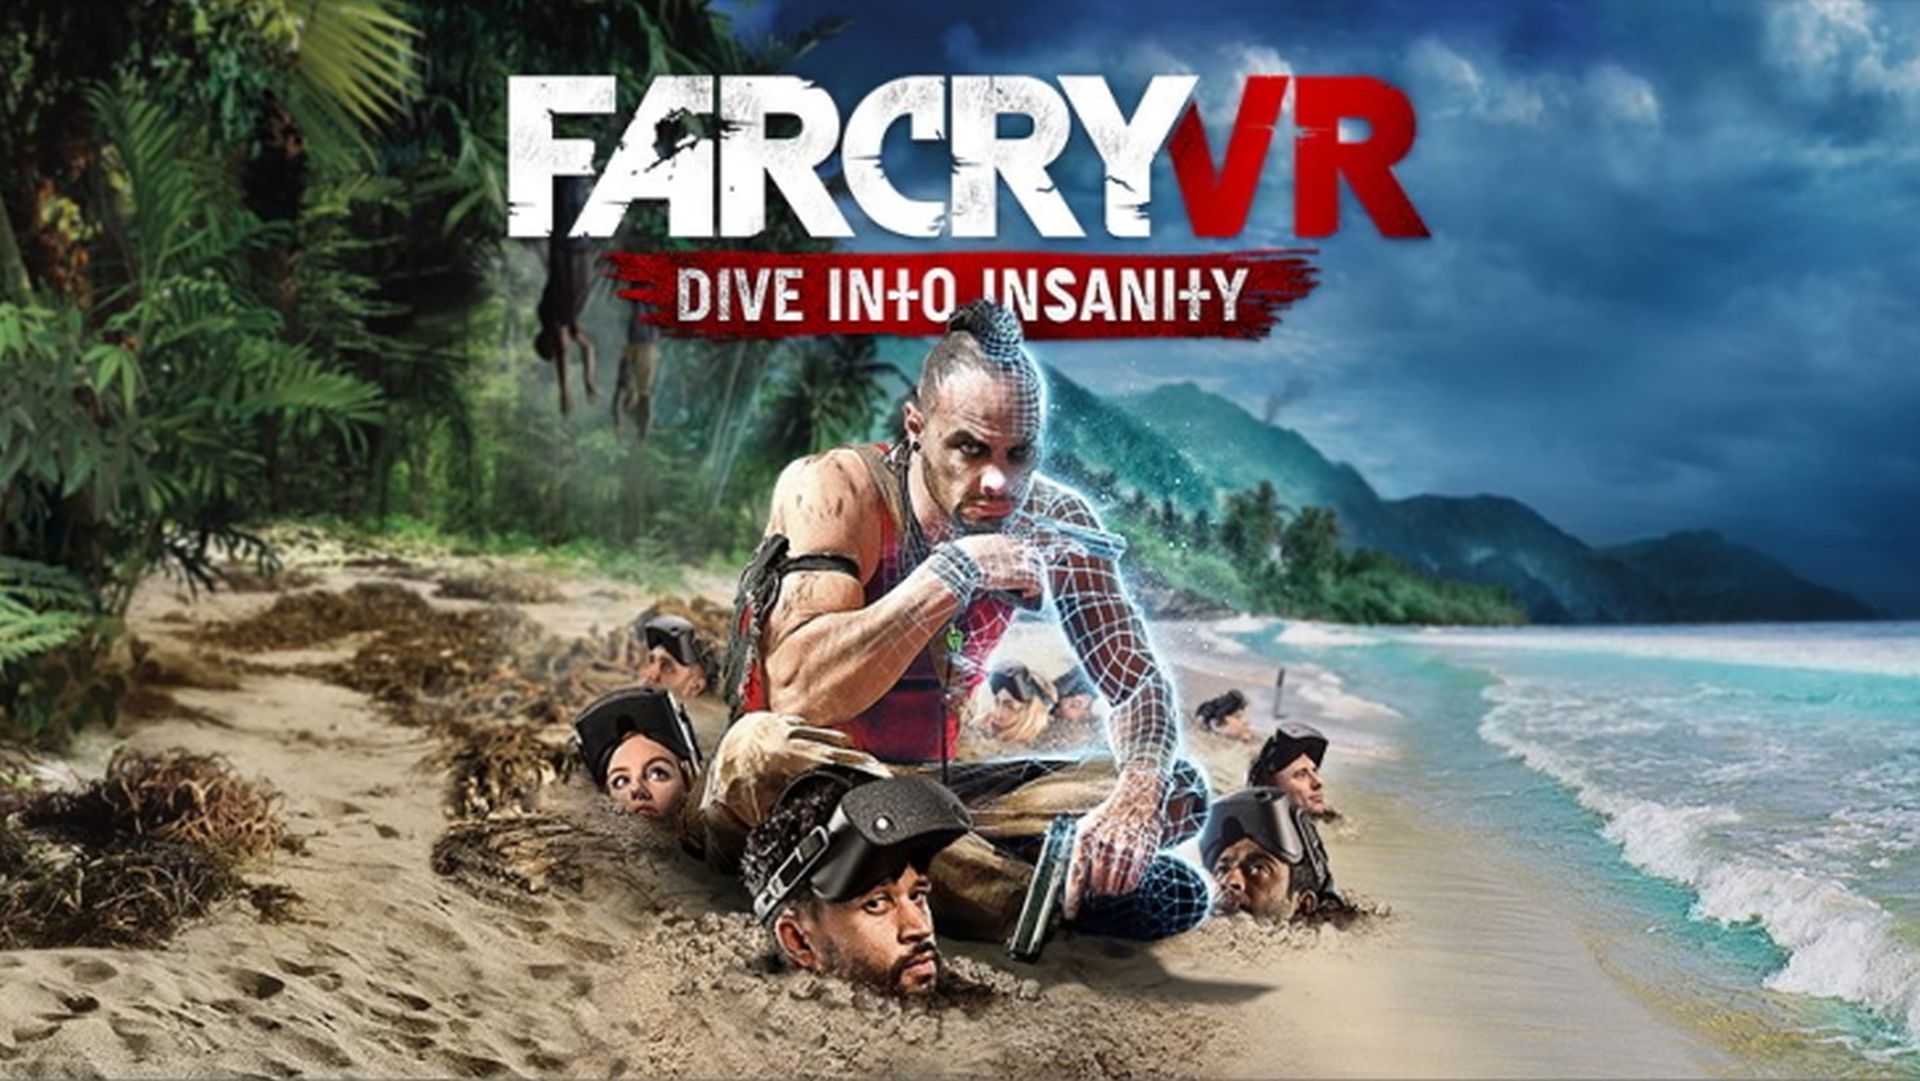 Far Cry Vr Dive Into Insanity